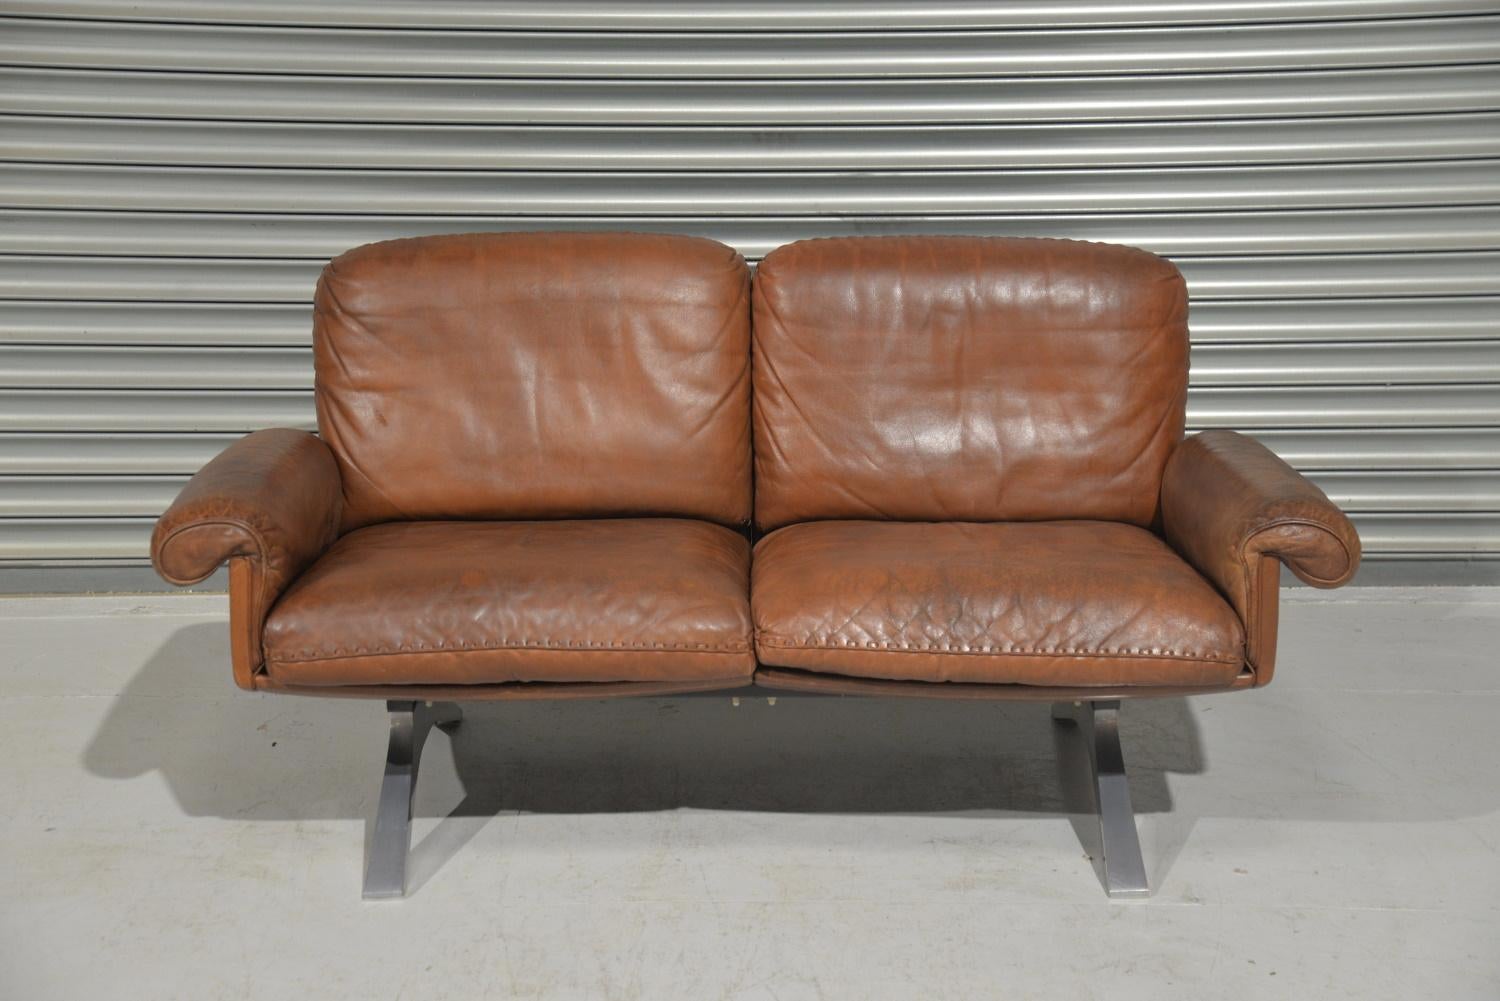 Discounted airfreight for our US and international customers (from 2 weeks door to door)

We are delighted to bring to you a vintage 1970s De Sede DS 31 two-seat sofa or loveseat in aniline leather with superb whipstitch edge detail. Hand built